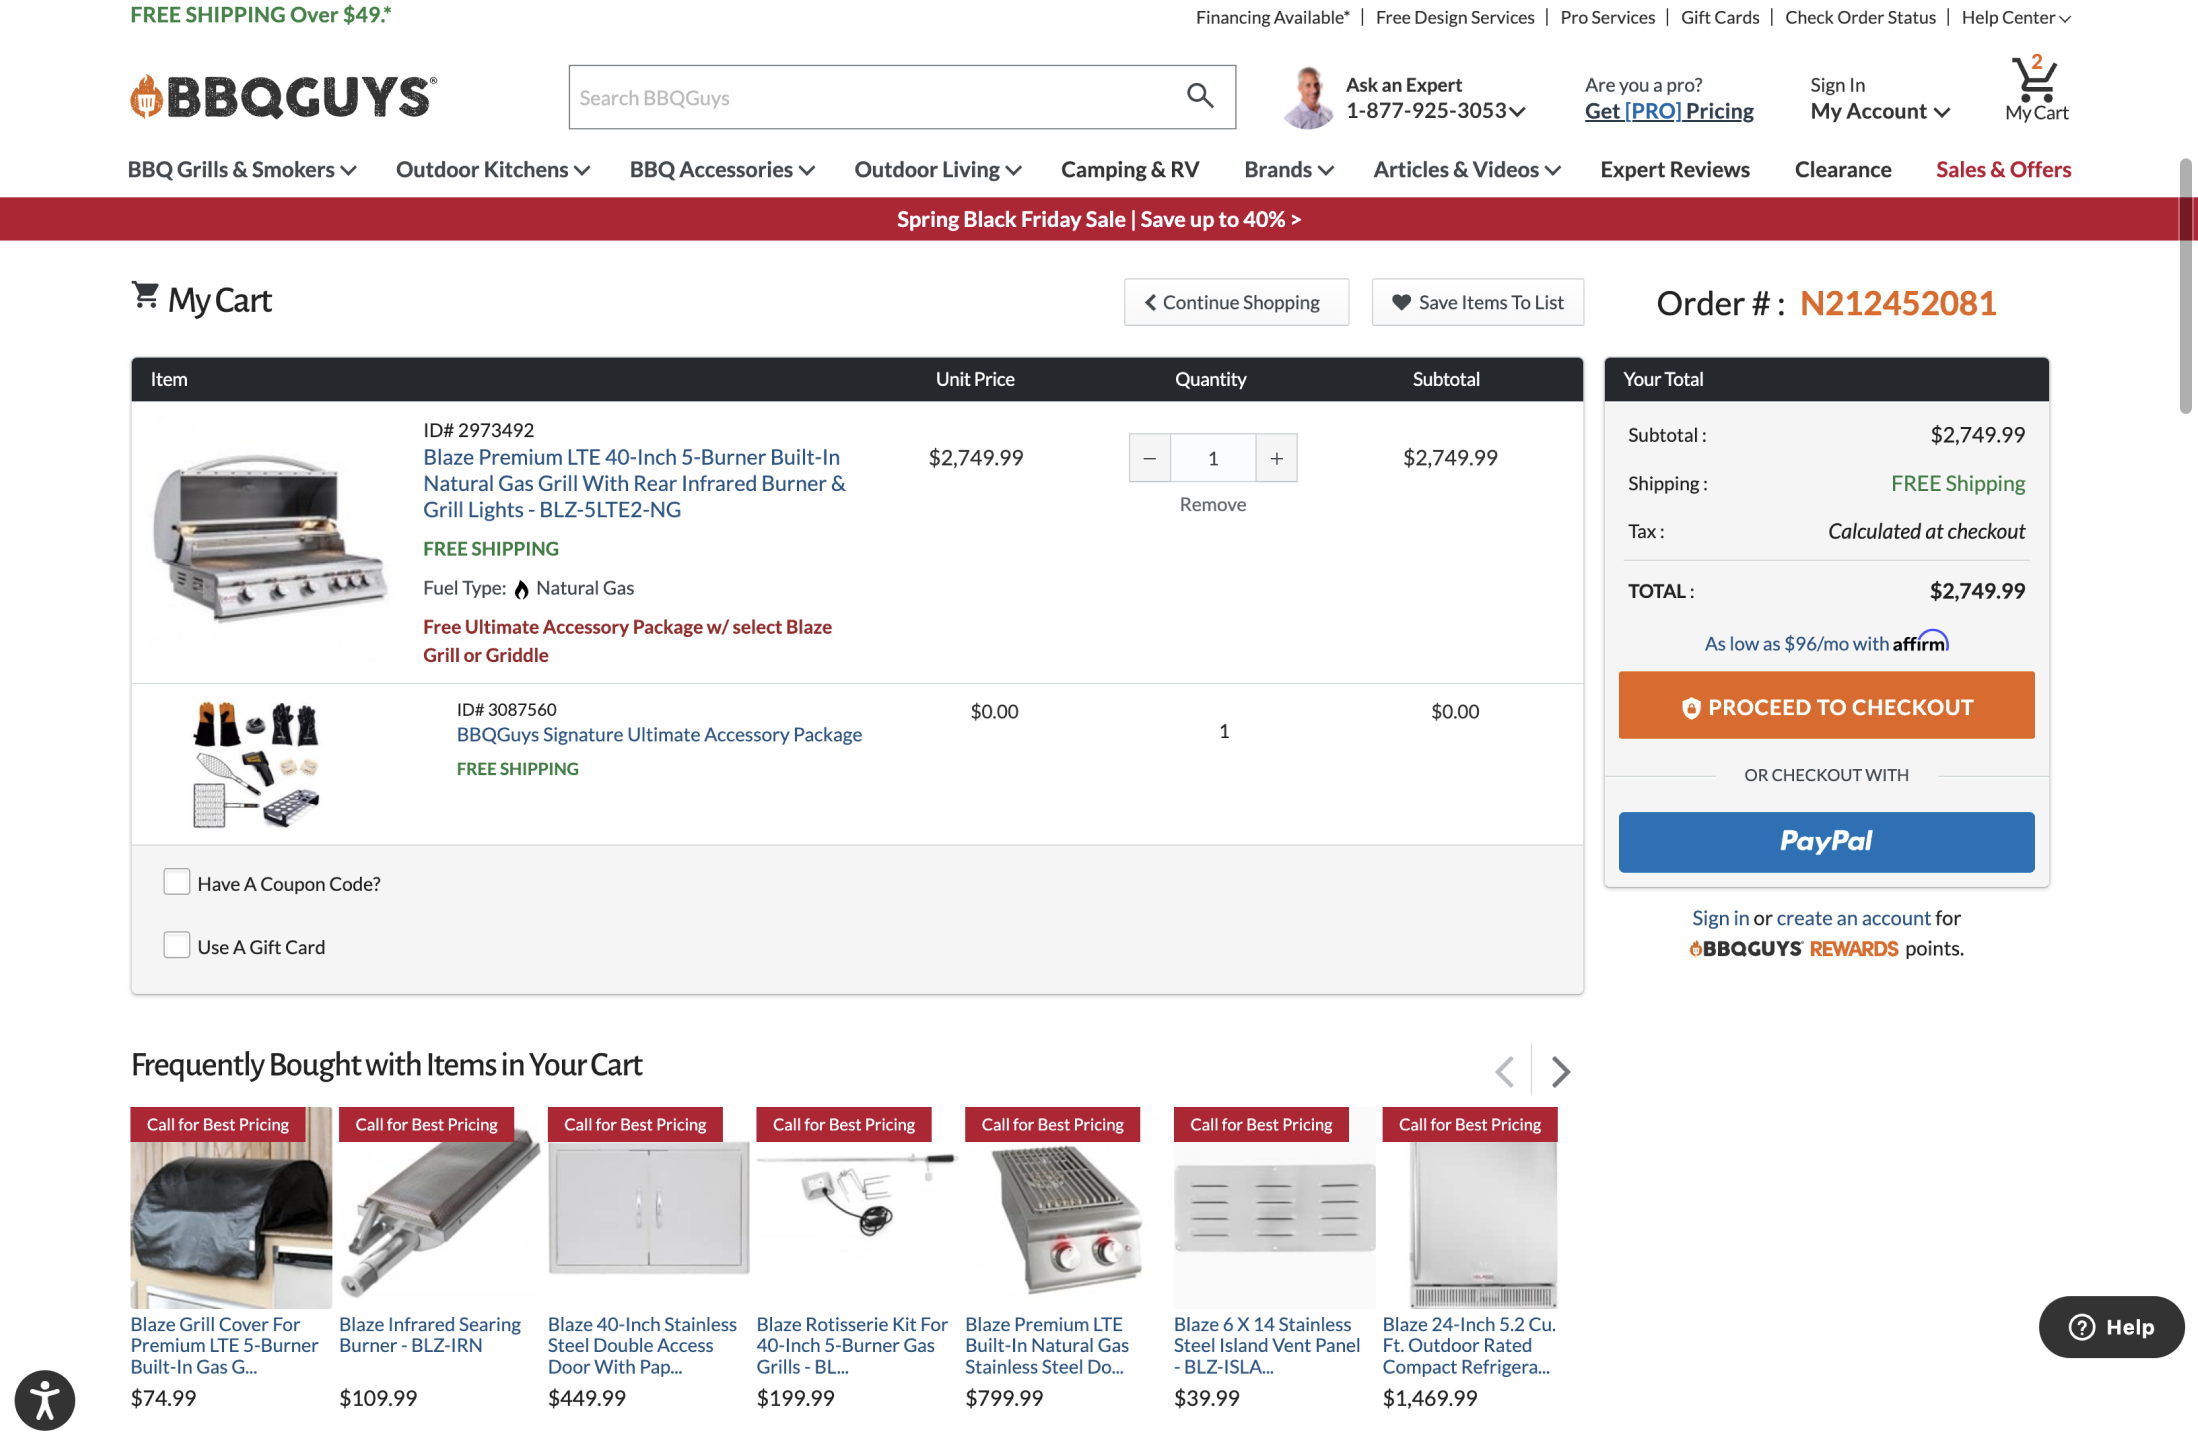 Product addons, shown in the confirmation page